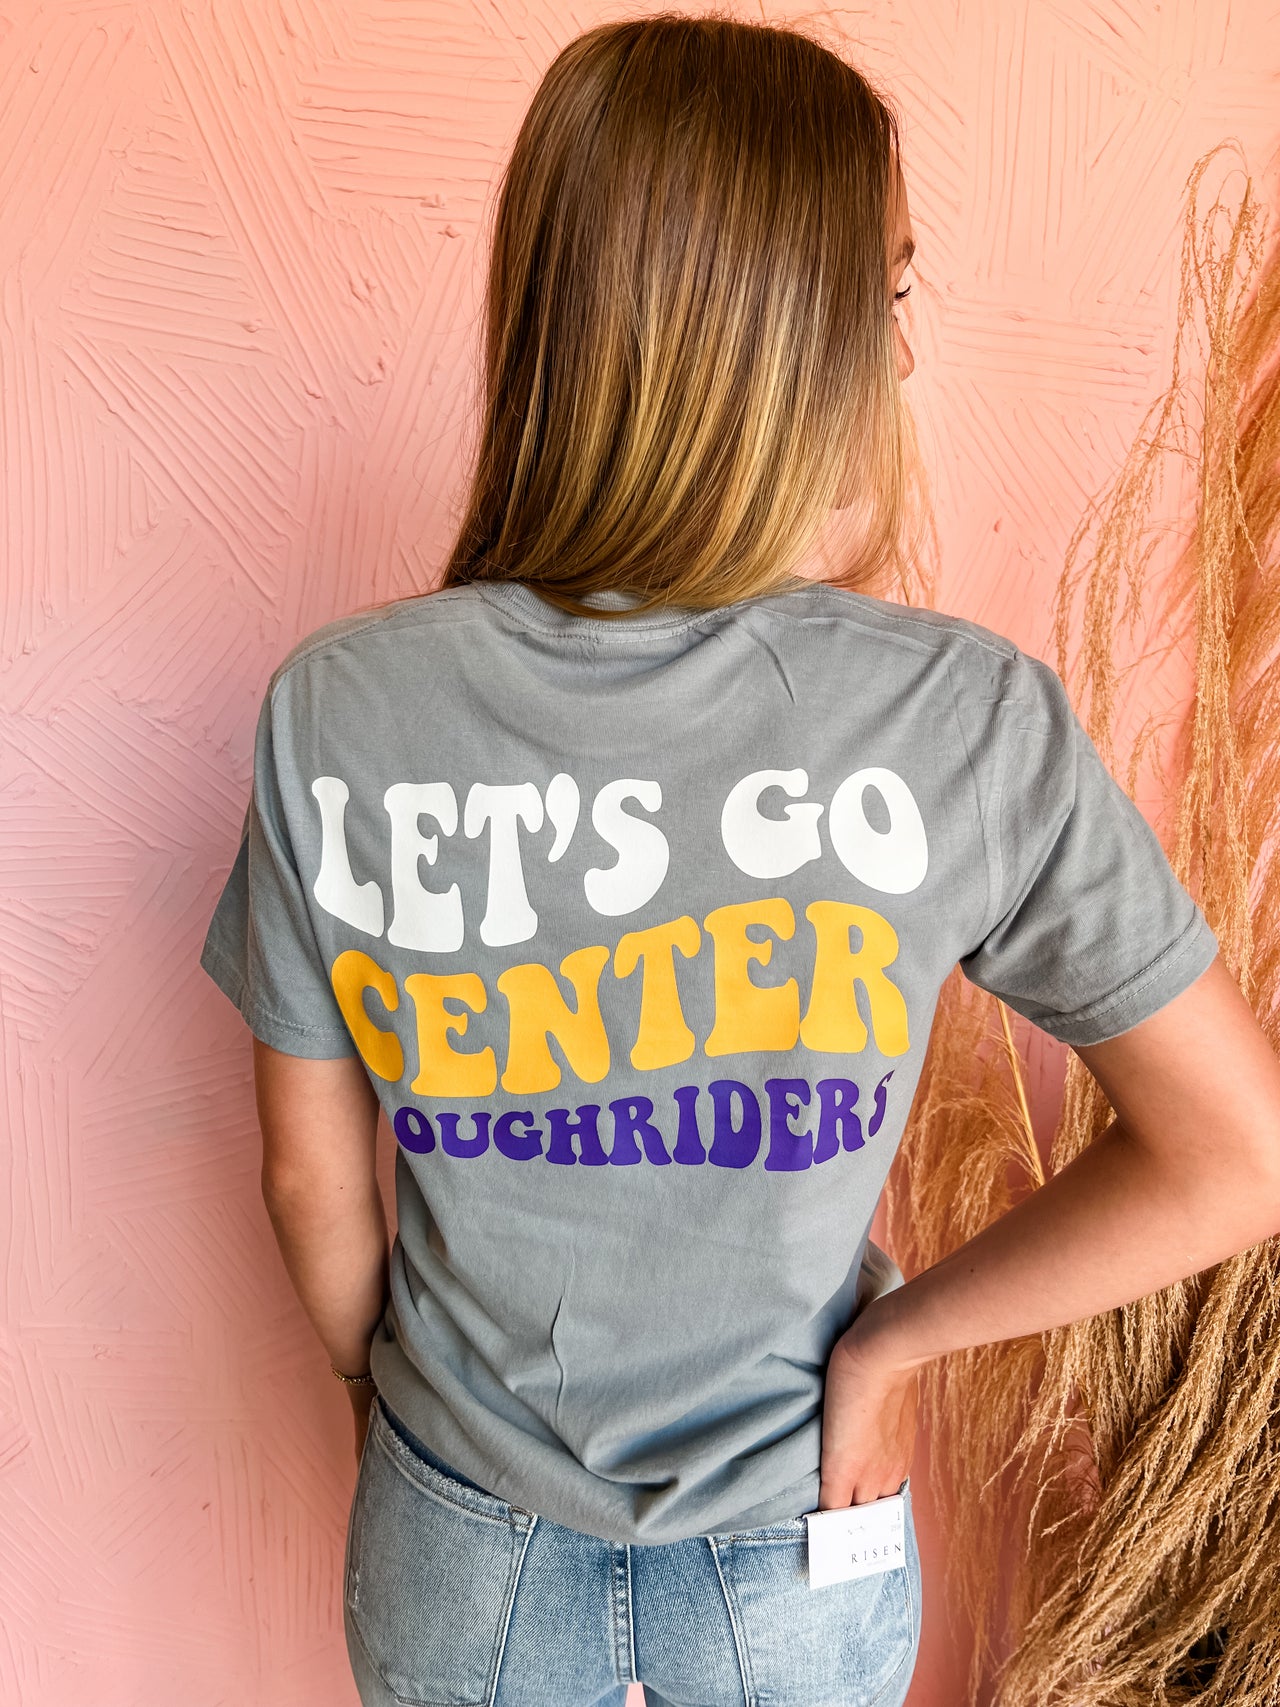 Let's Go Center Roughriders- Adult